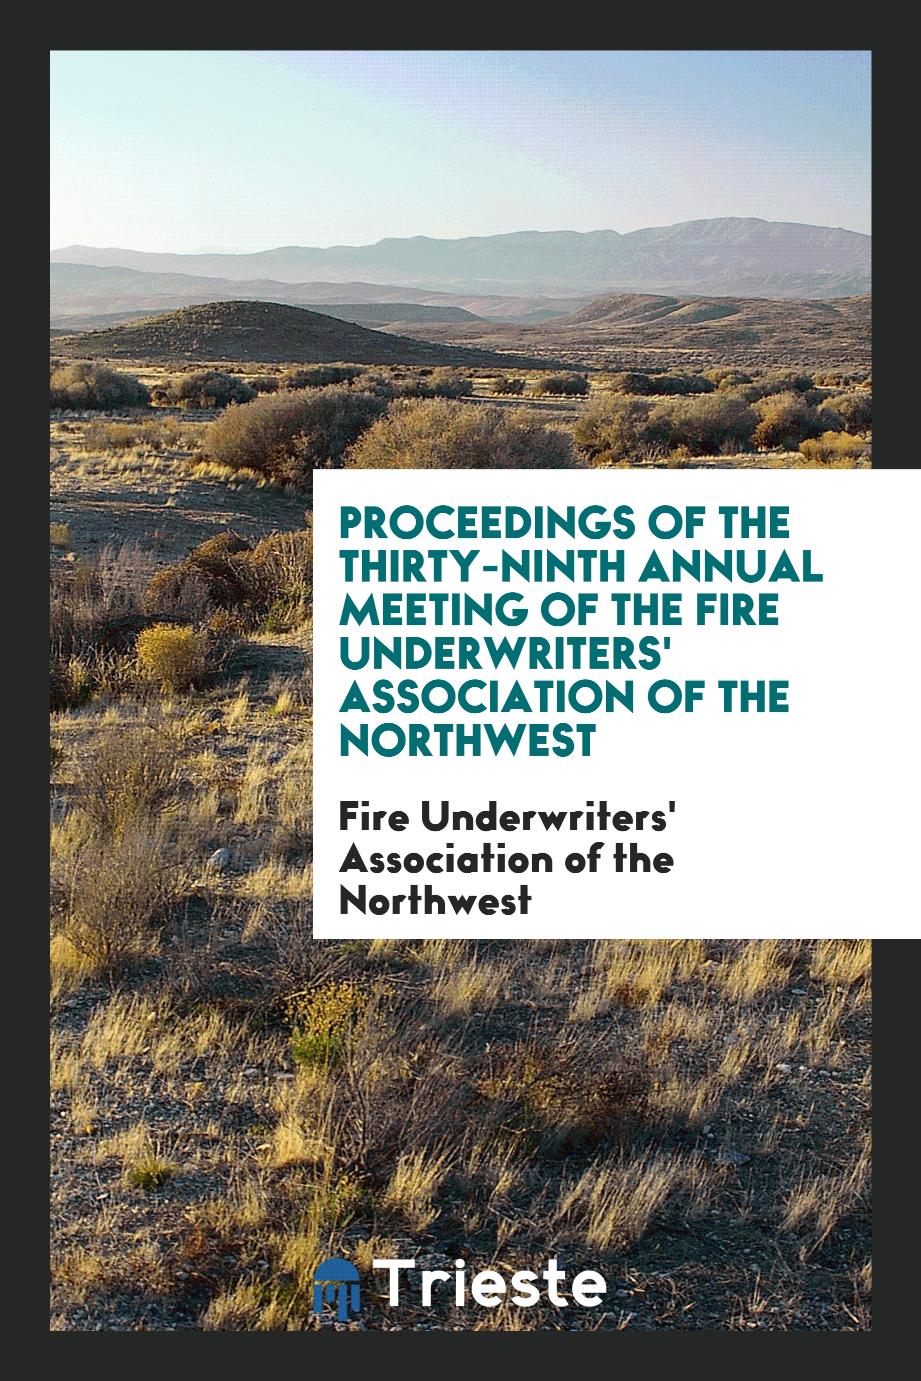 Proceedings of the Thirty-Ninth Annual Meeting of the Fire Underwriters' Association of the Northwest